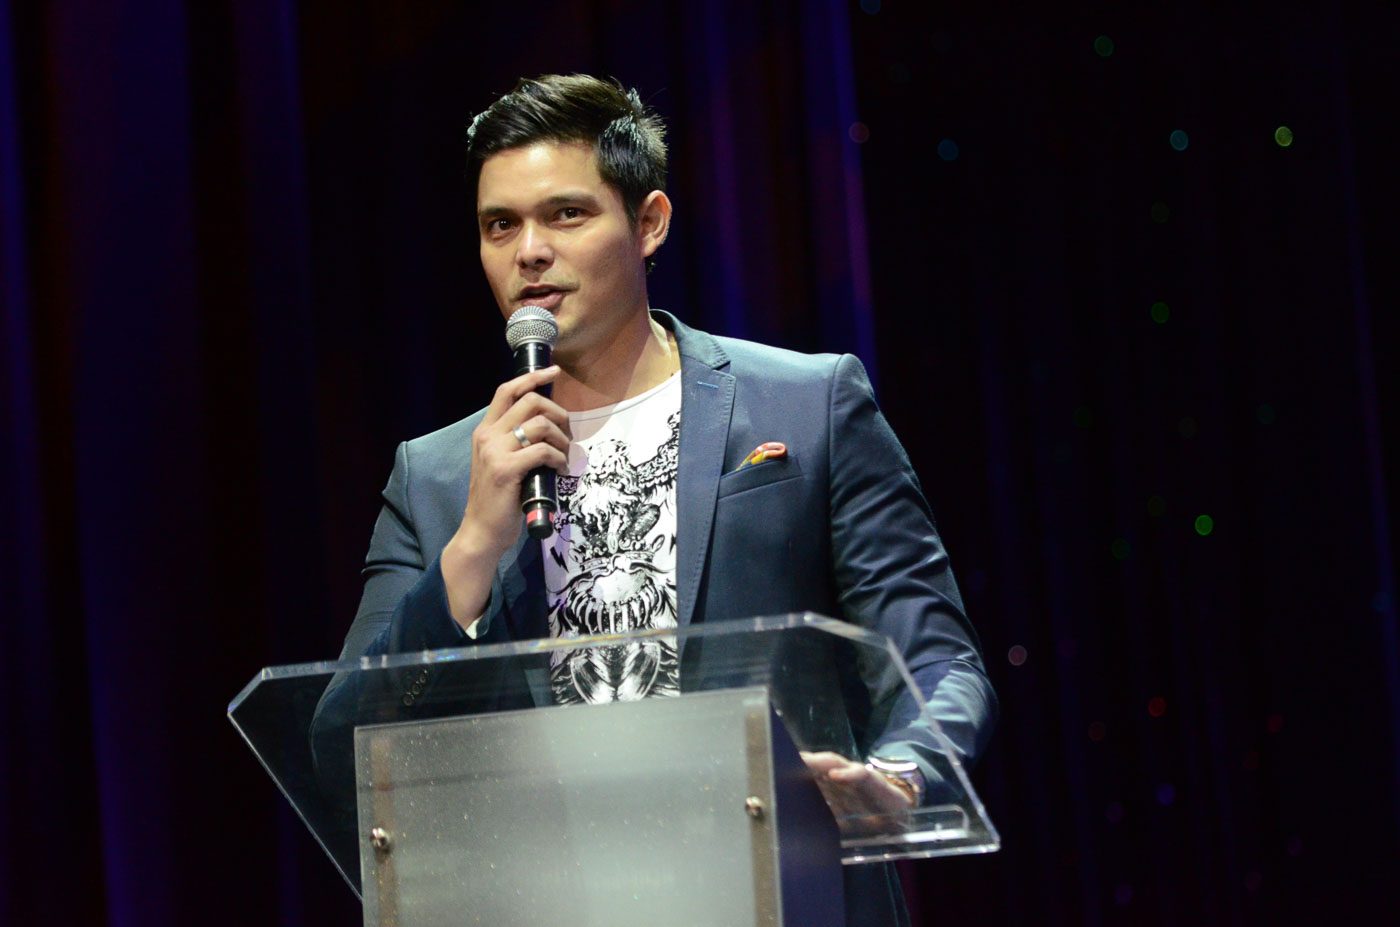 PRESENTOR. National Youth Commission's Dingdong Dantes presents one of the awards during the event last September 26. Photo by Alecs Ongcal/Rappler 